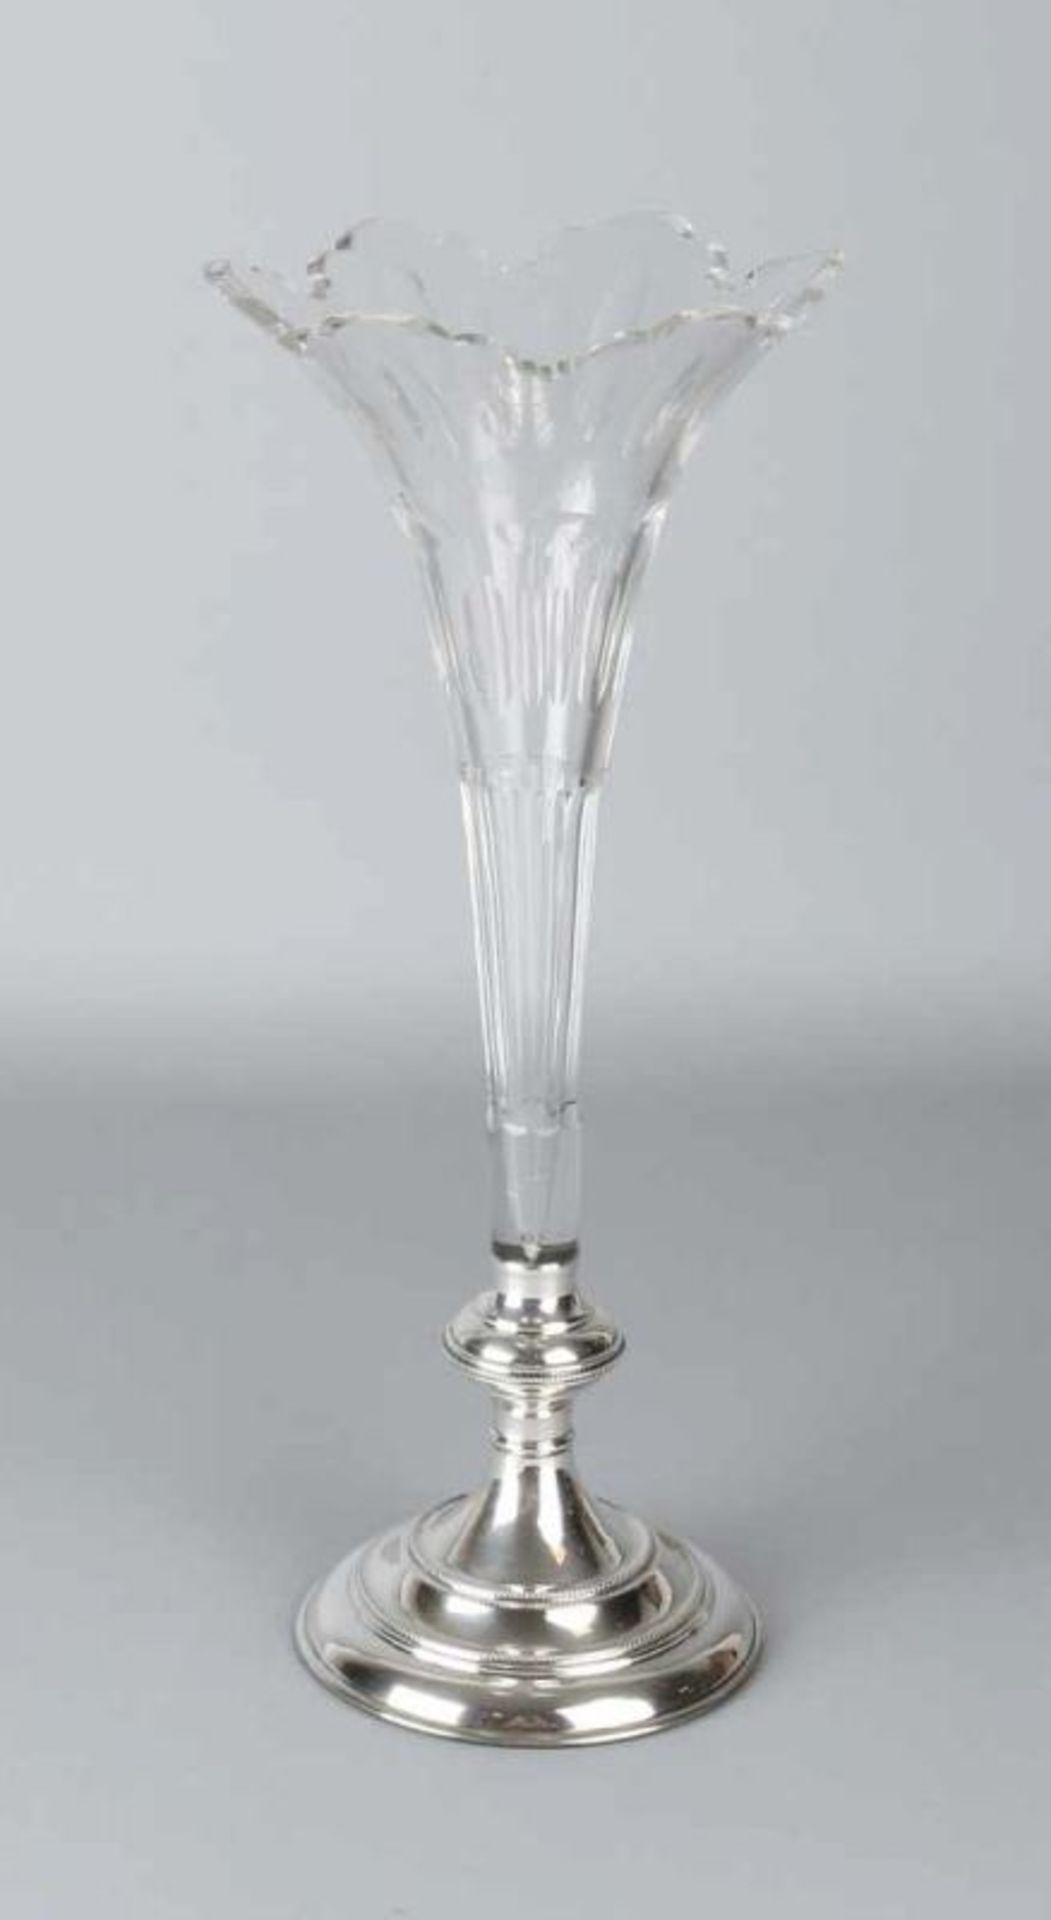 Beautiful crystal vase, Flute, placed on a silver base. Trumpet-shaped crystal vase with a contoured